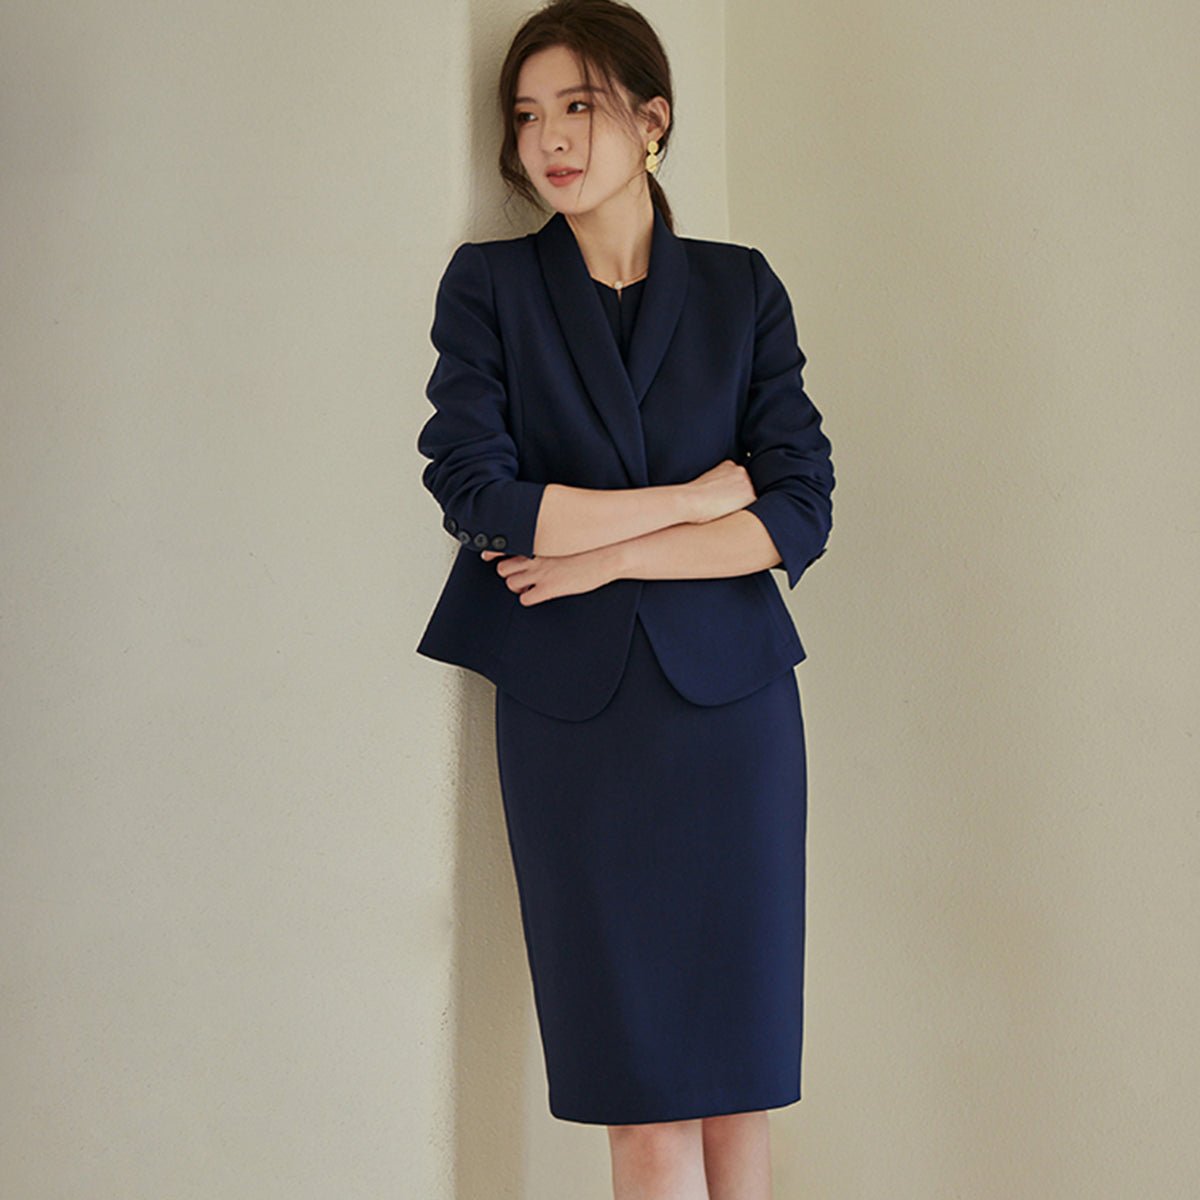 Navy Double-Breasted Blazer and Pencil Skirt Set - 0cm